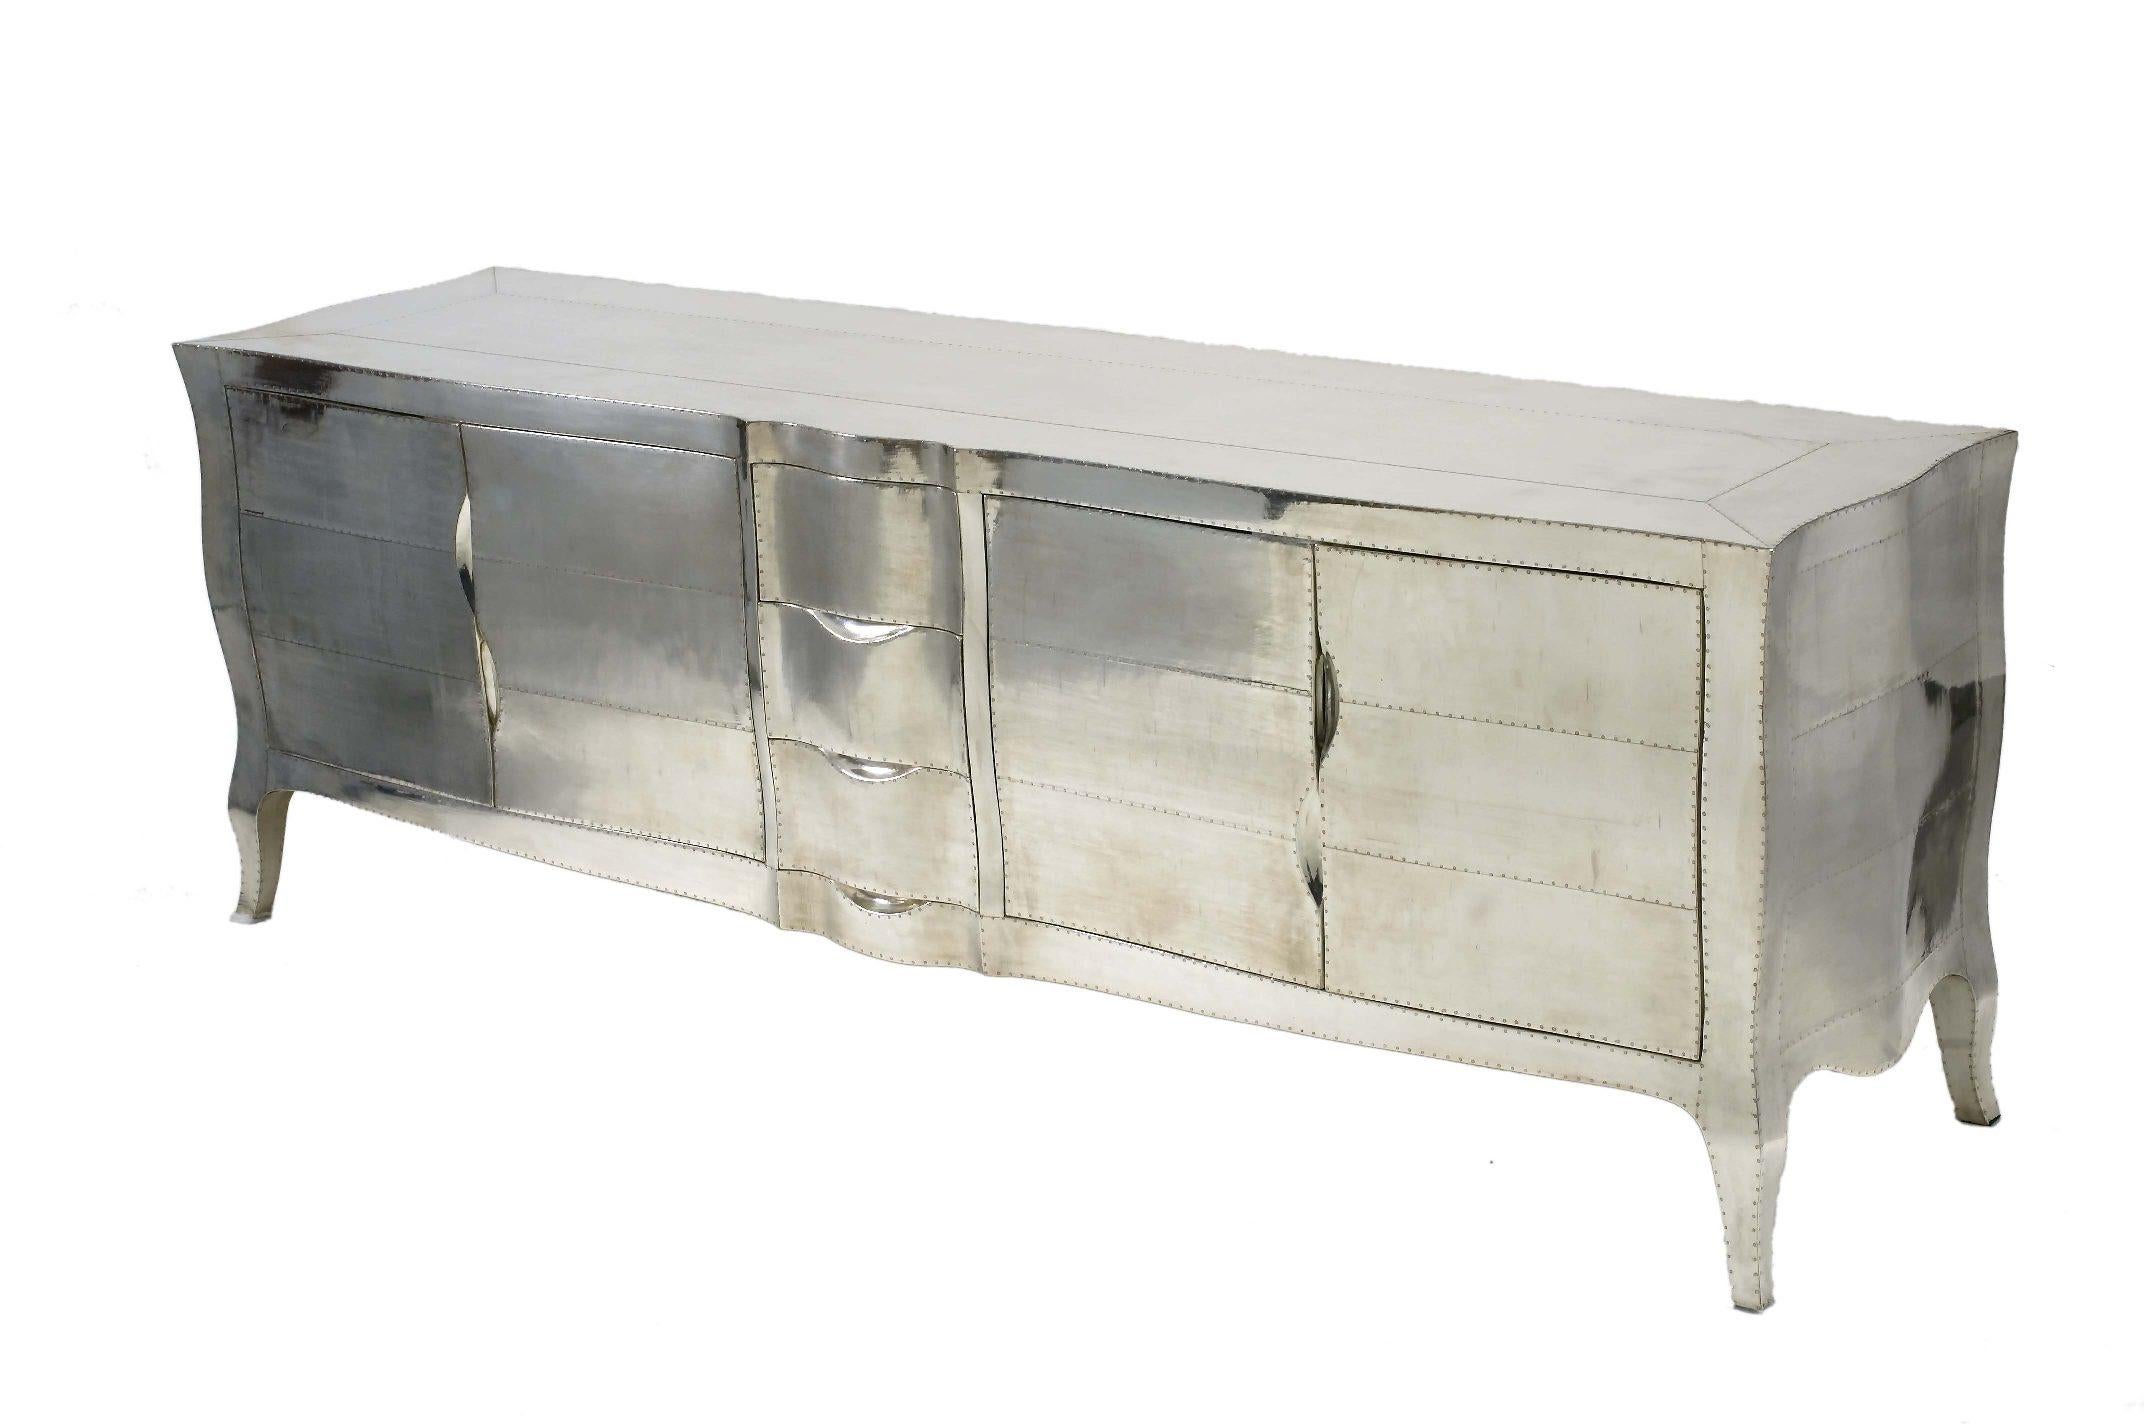 A set of three mid century modern credenzas.

1. Louise credenza in smooth white bronze in size 78